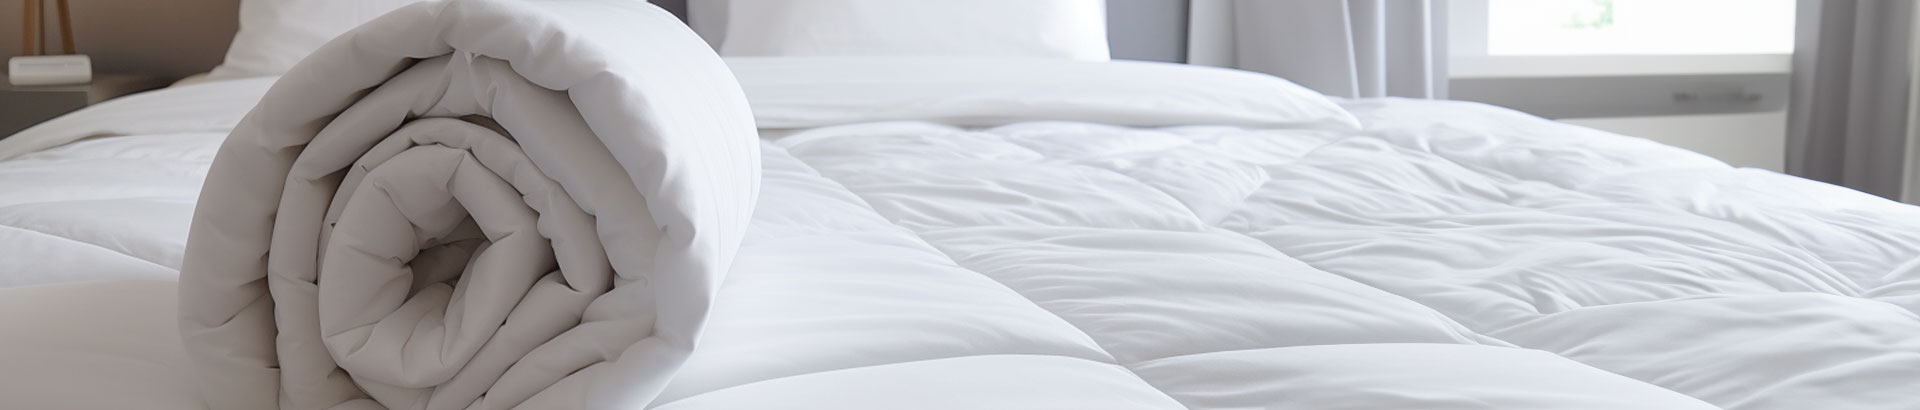 Range of Devon Duvets wool duvets in different bedroom settings, showcasing style and comfort.